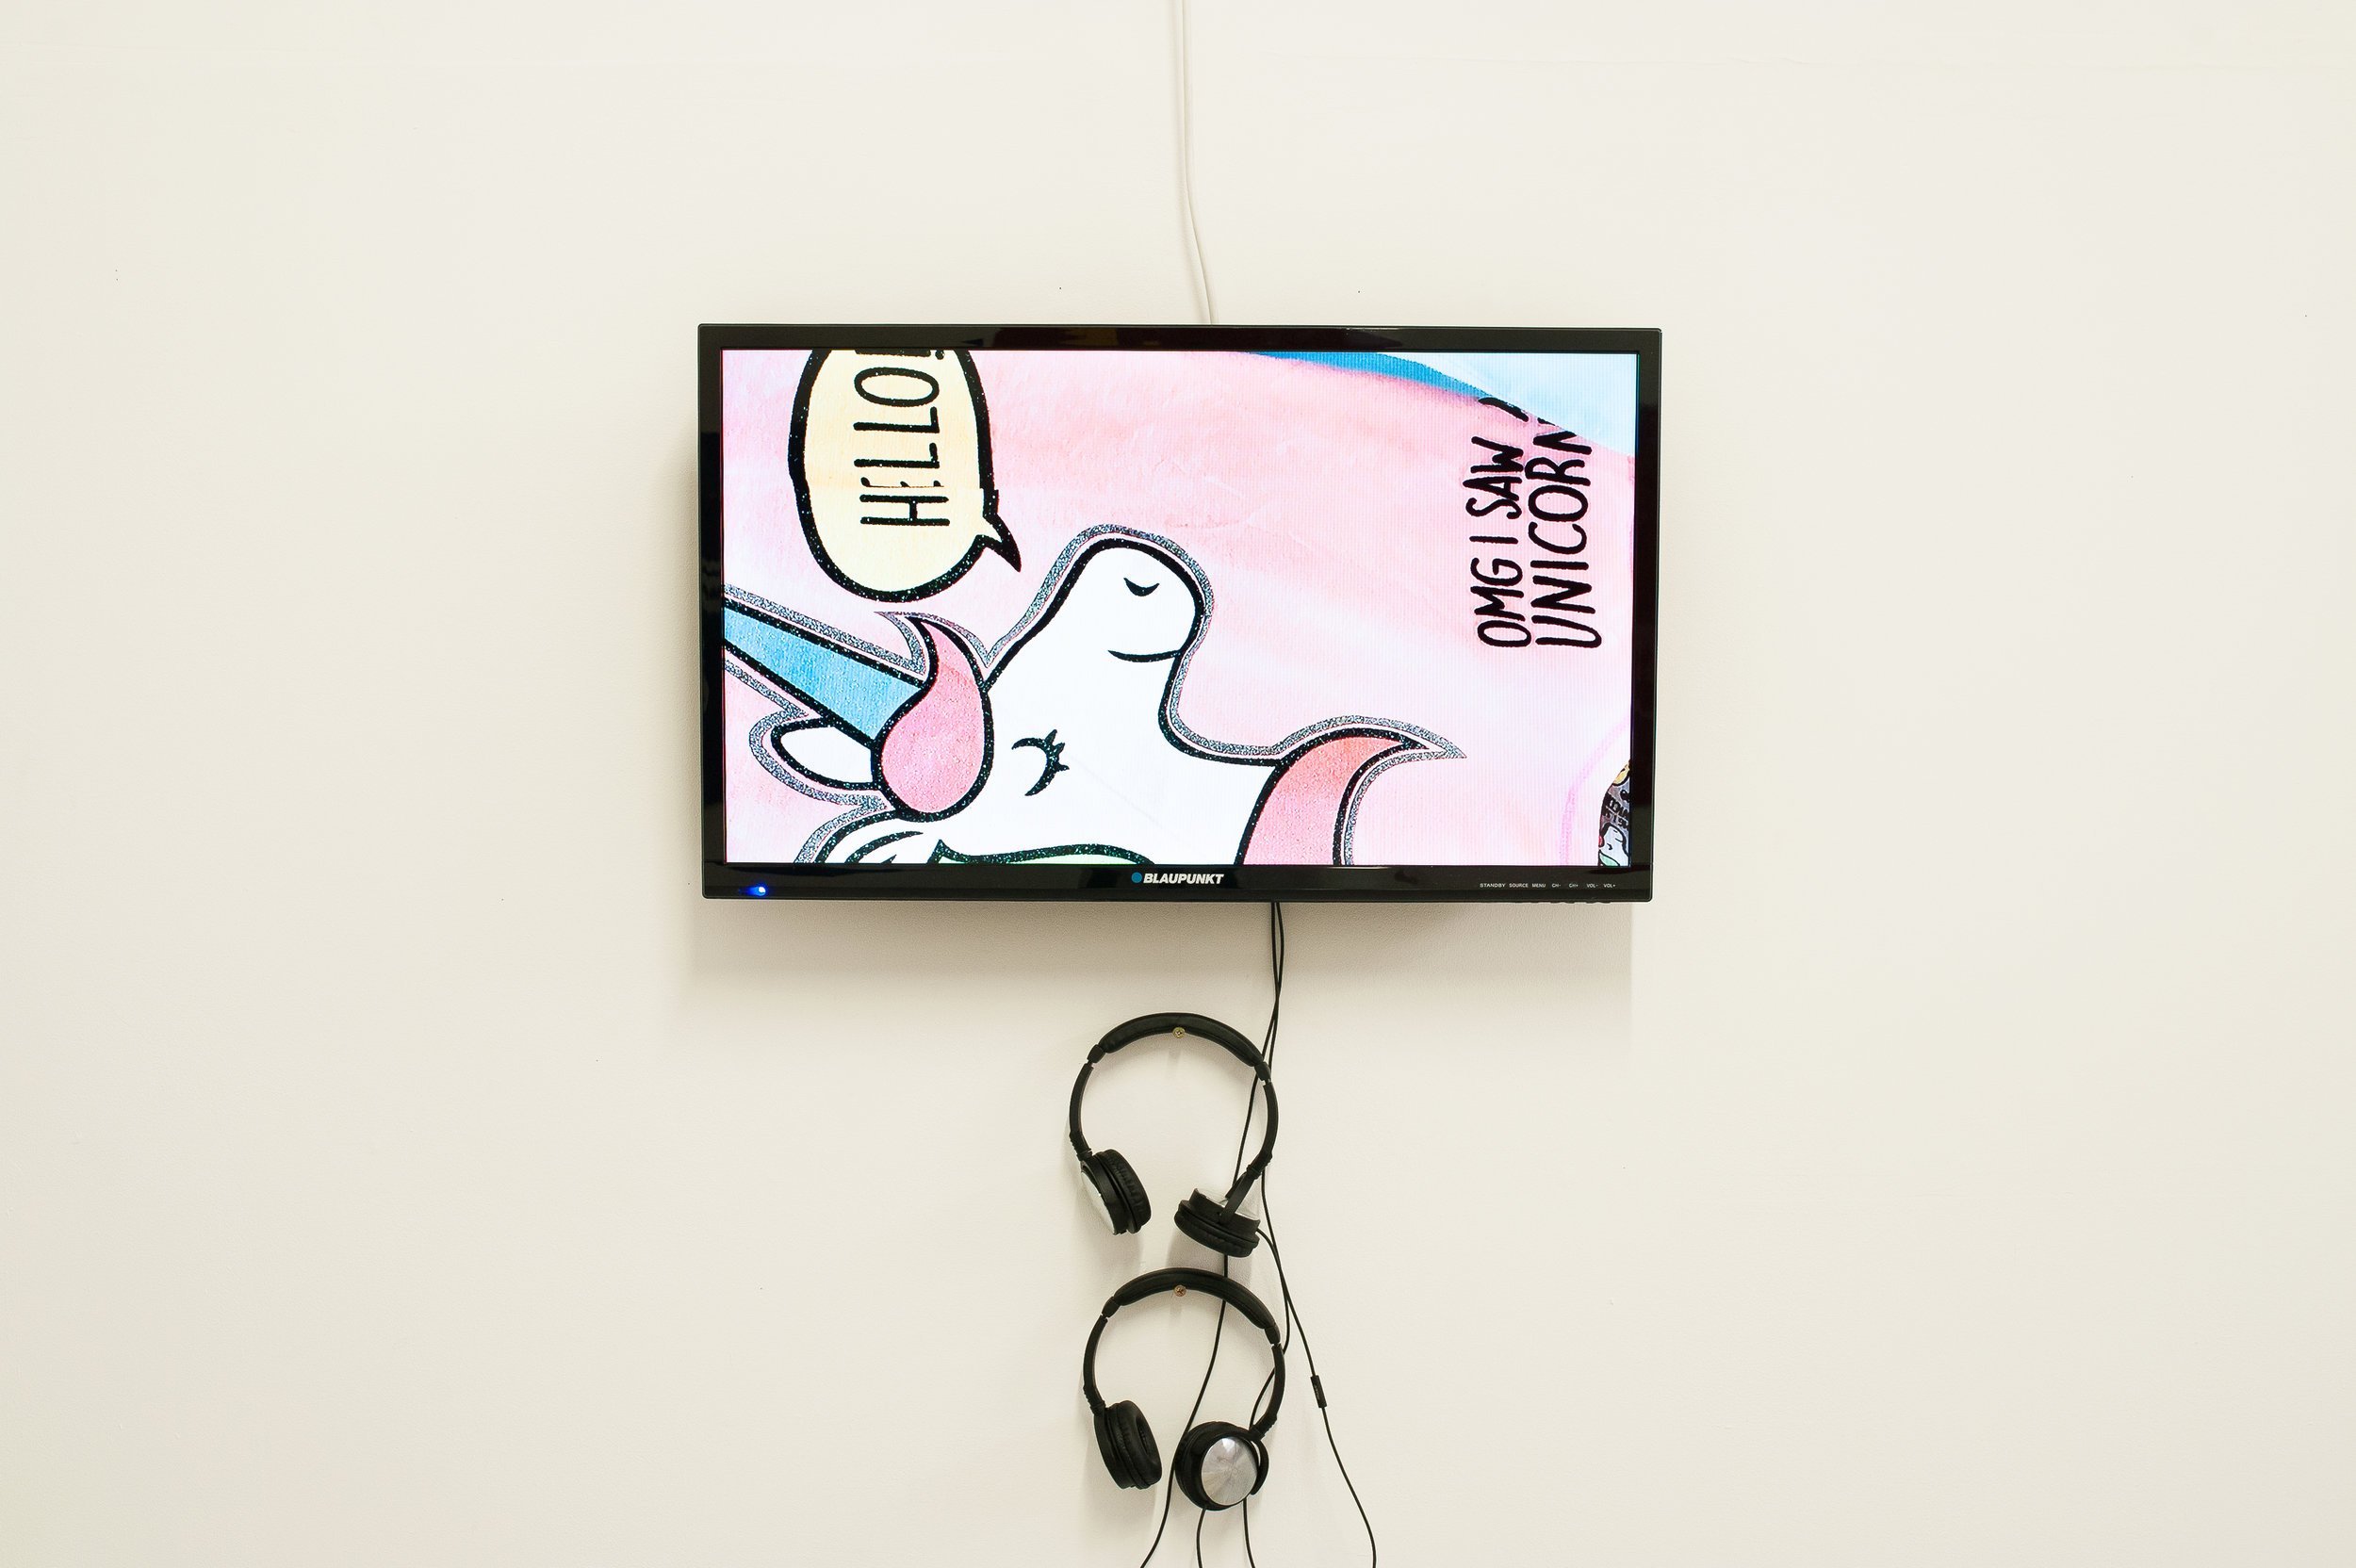 Louise Ashcroft, I'd Rather be Shopping, 2017. Installation view, arebyte Gallery, London.